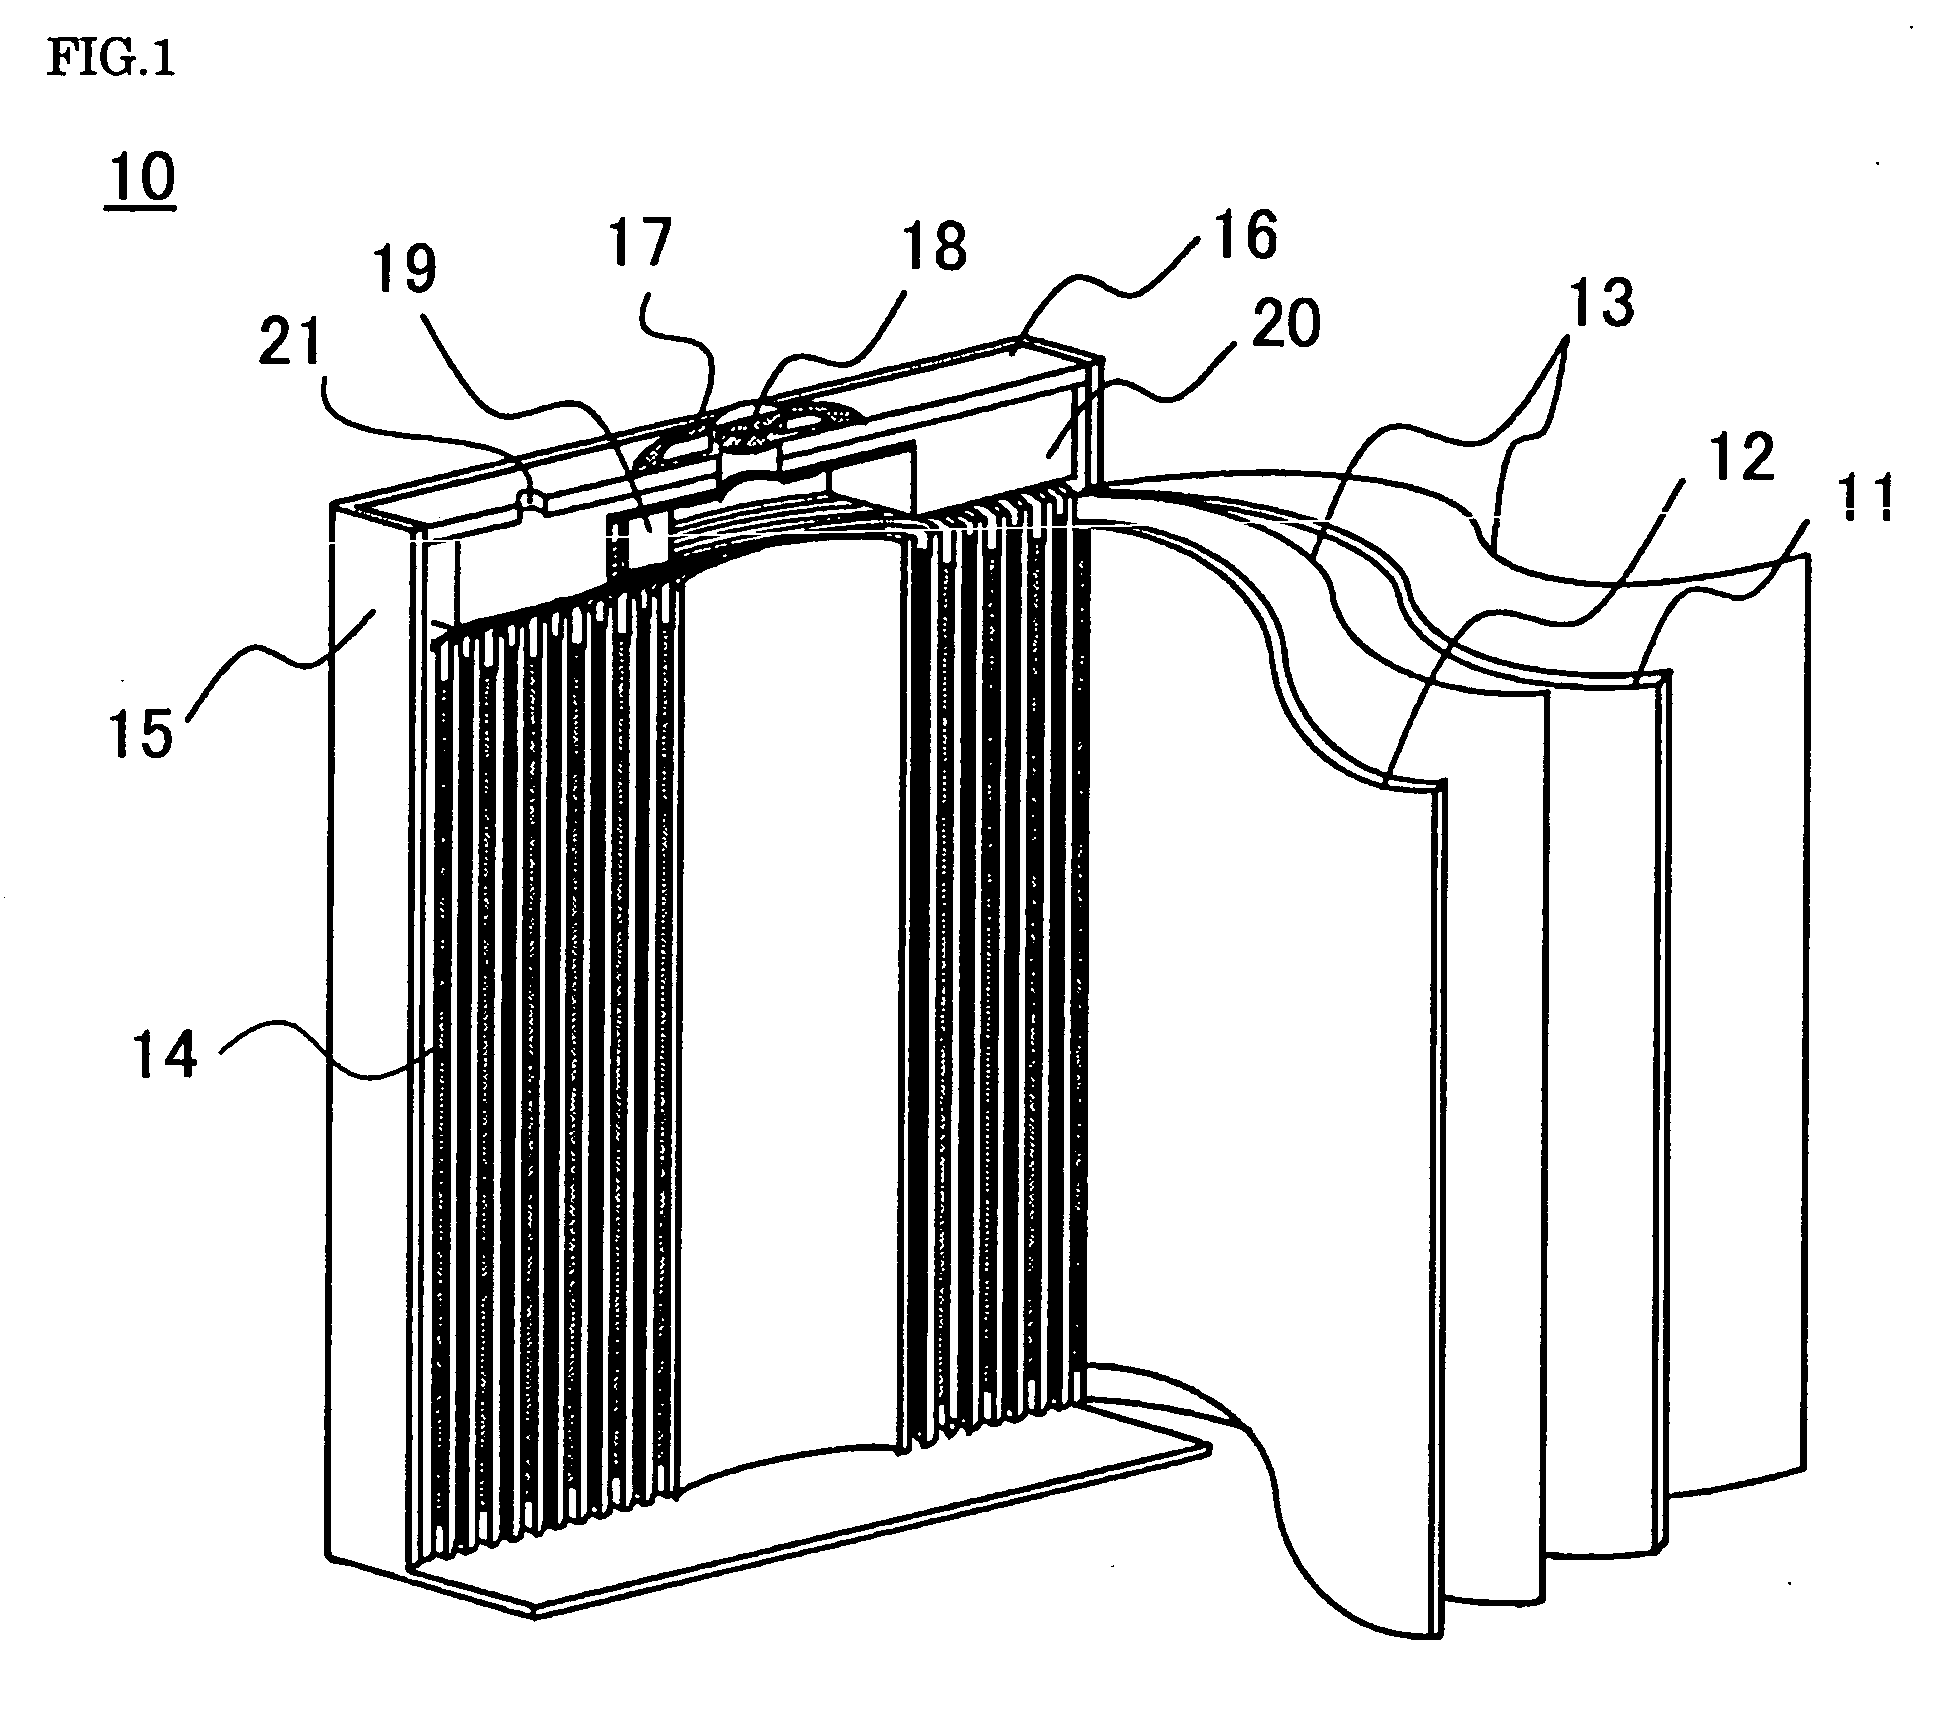 Nonaqueous electrolyte secondary battery, nonaqueous electrolyte, and charging method therefor